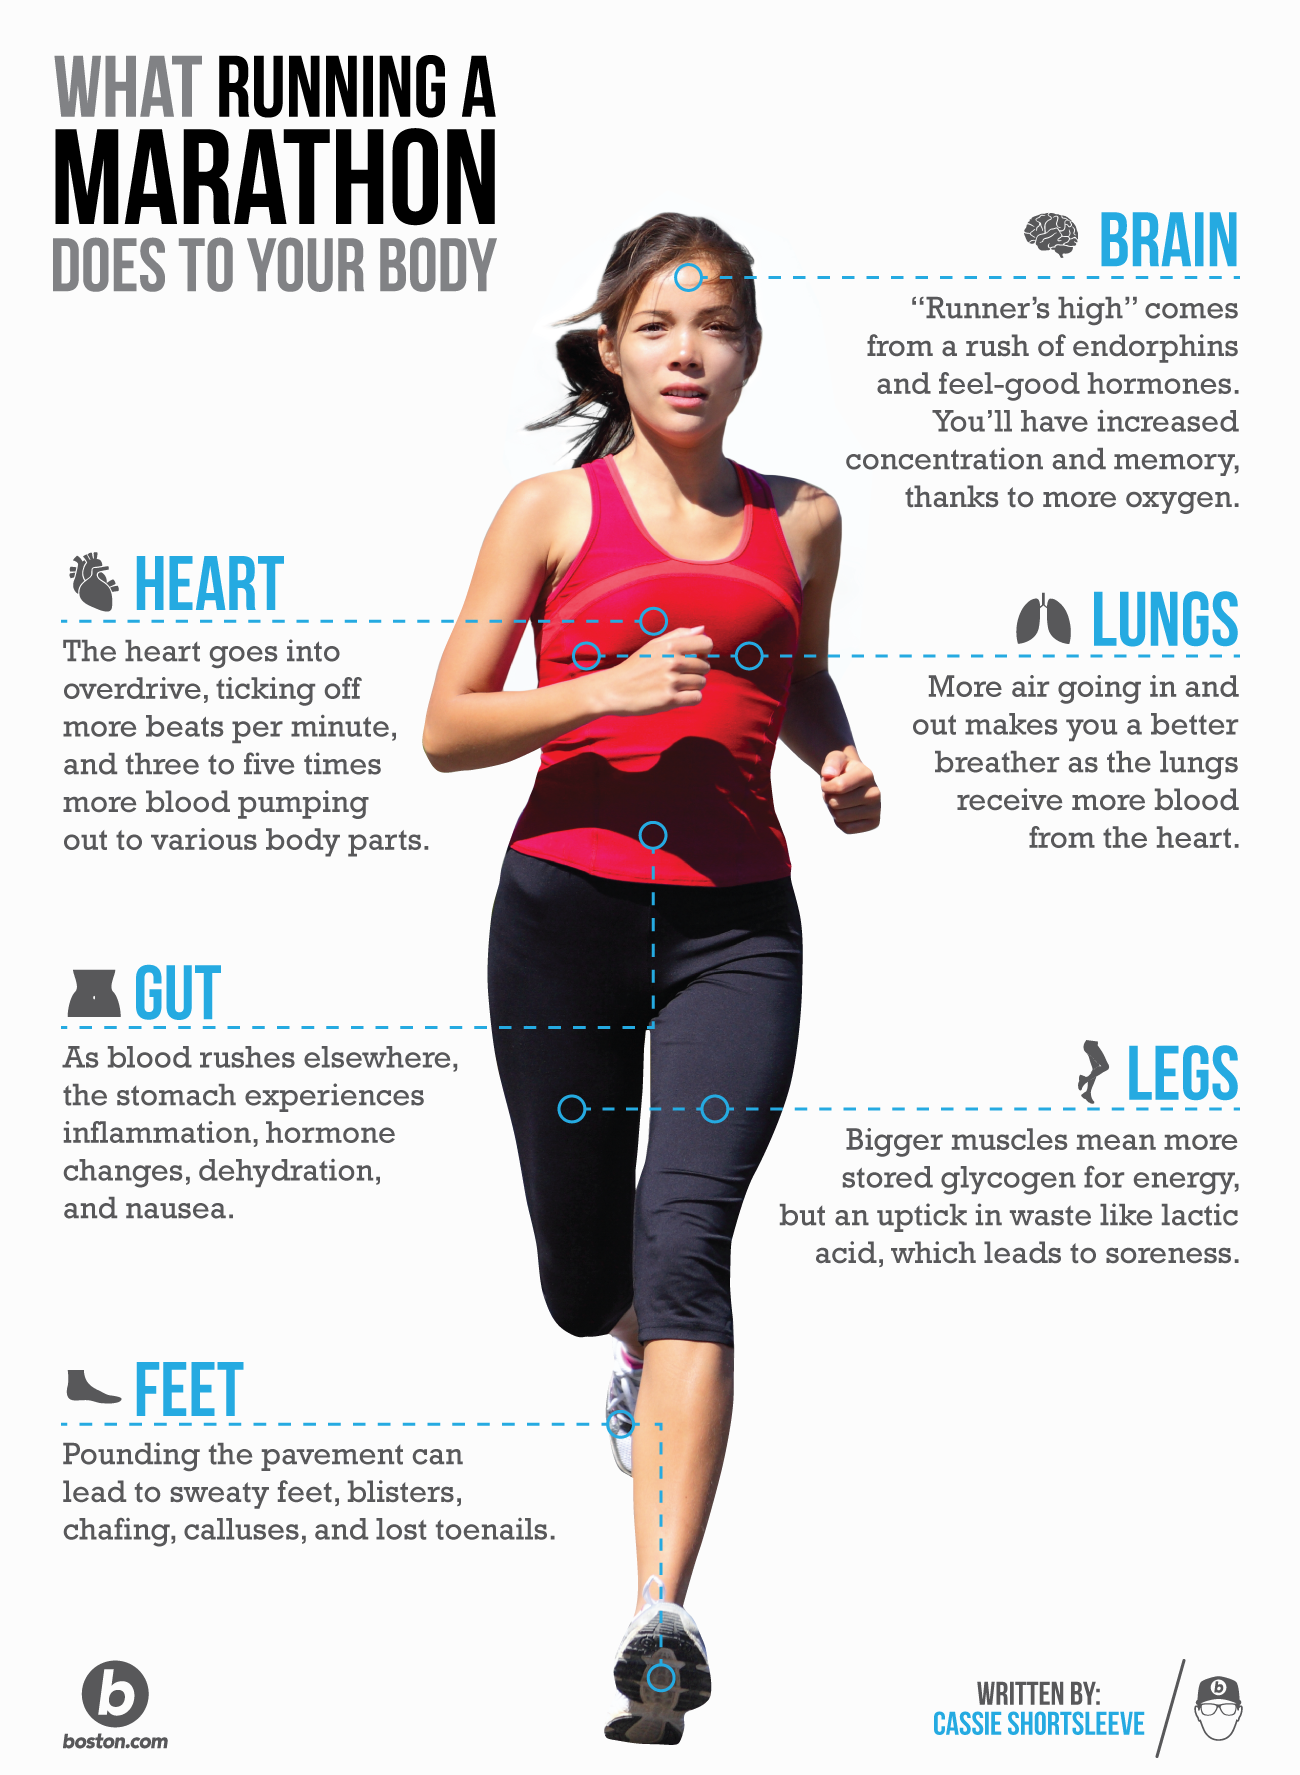 What Running Does To Your Body